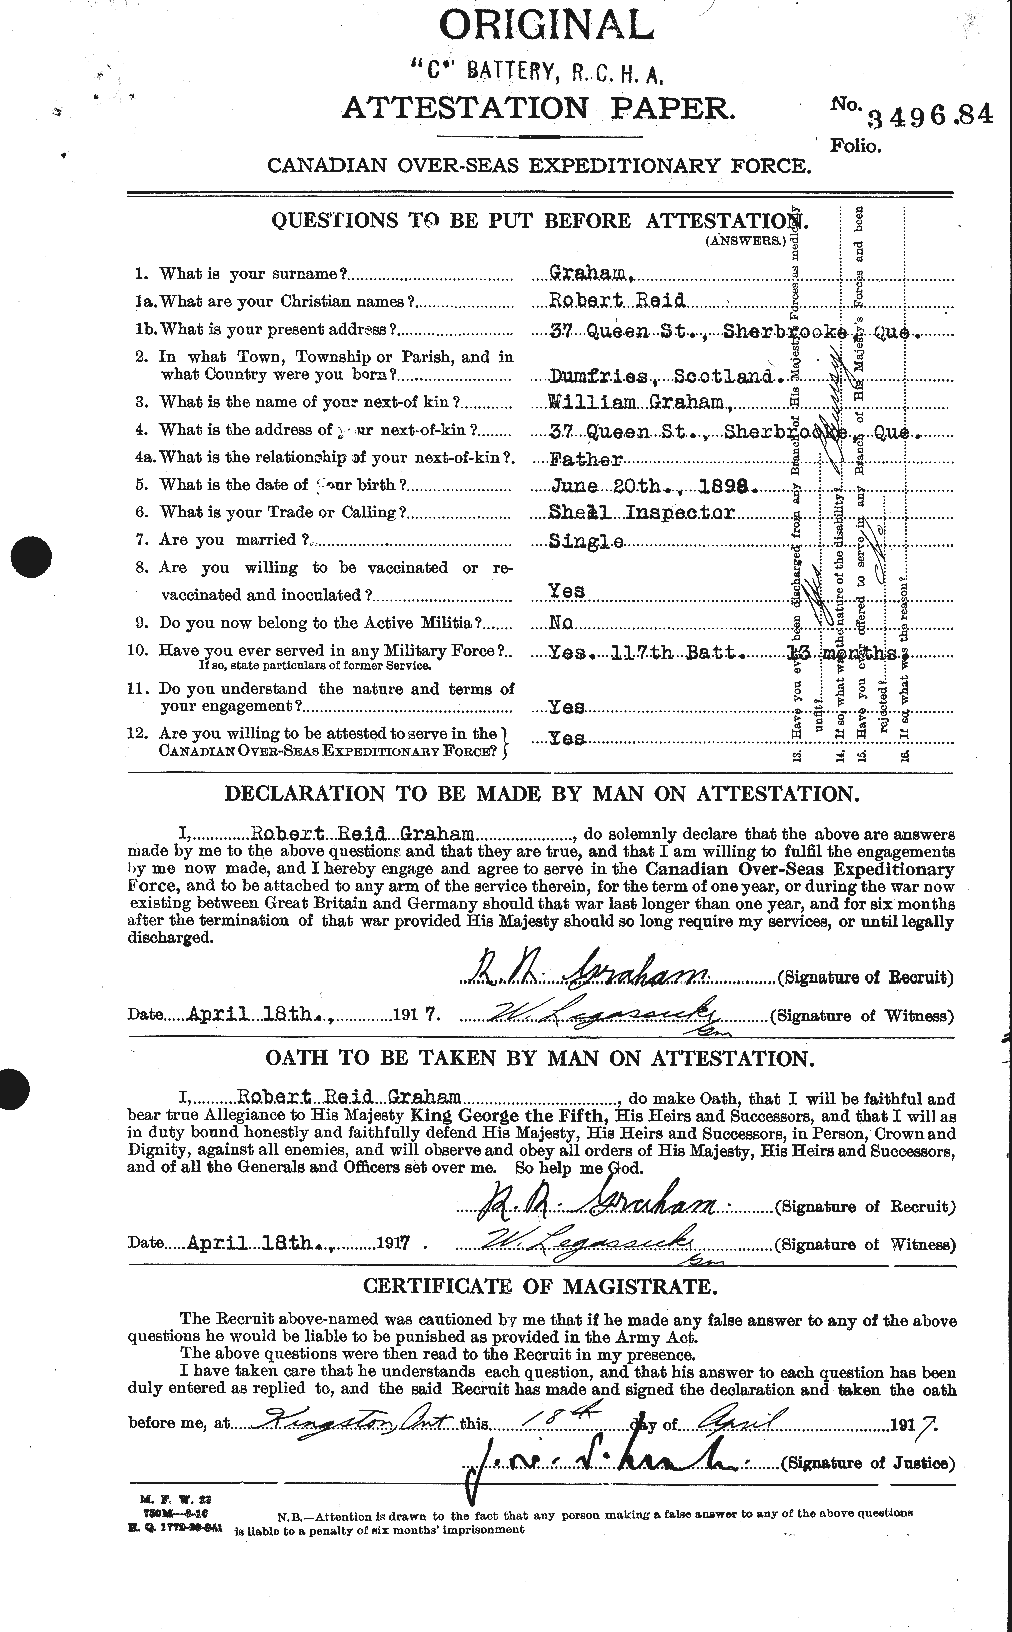 Personnel Records of the First World War - CEF 359421a